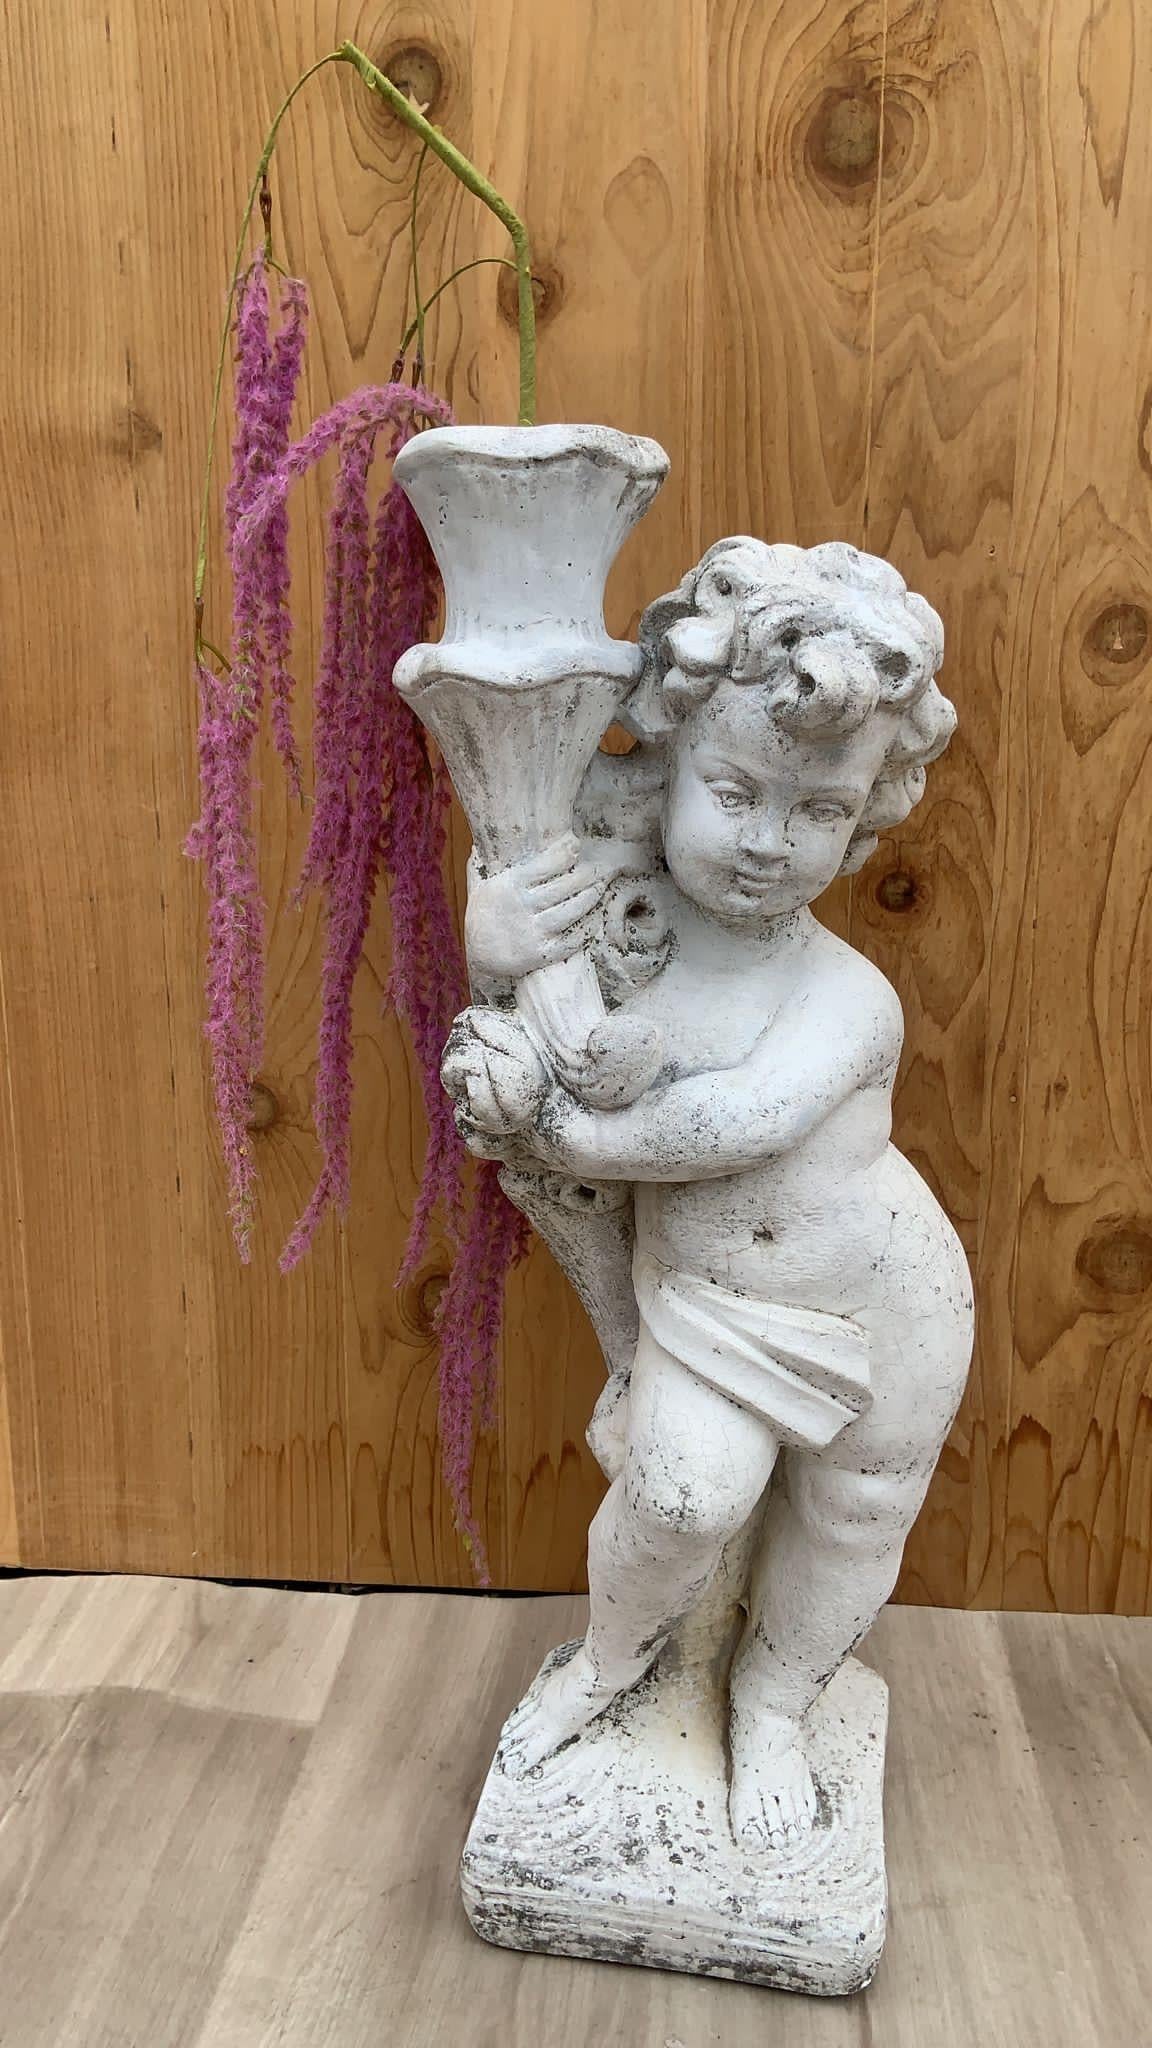 Vintage Neoclassical Cherub/Putti Garden Statue

From a beautiful Southern Estate, approximately 50 years old. Stunning, neoclassical cherubs/putti garden statue.

We have other different statues purchased from the same estate under separate